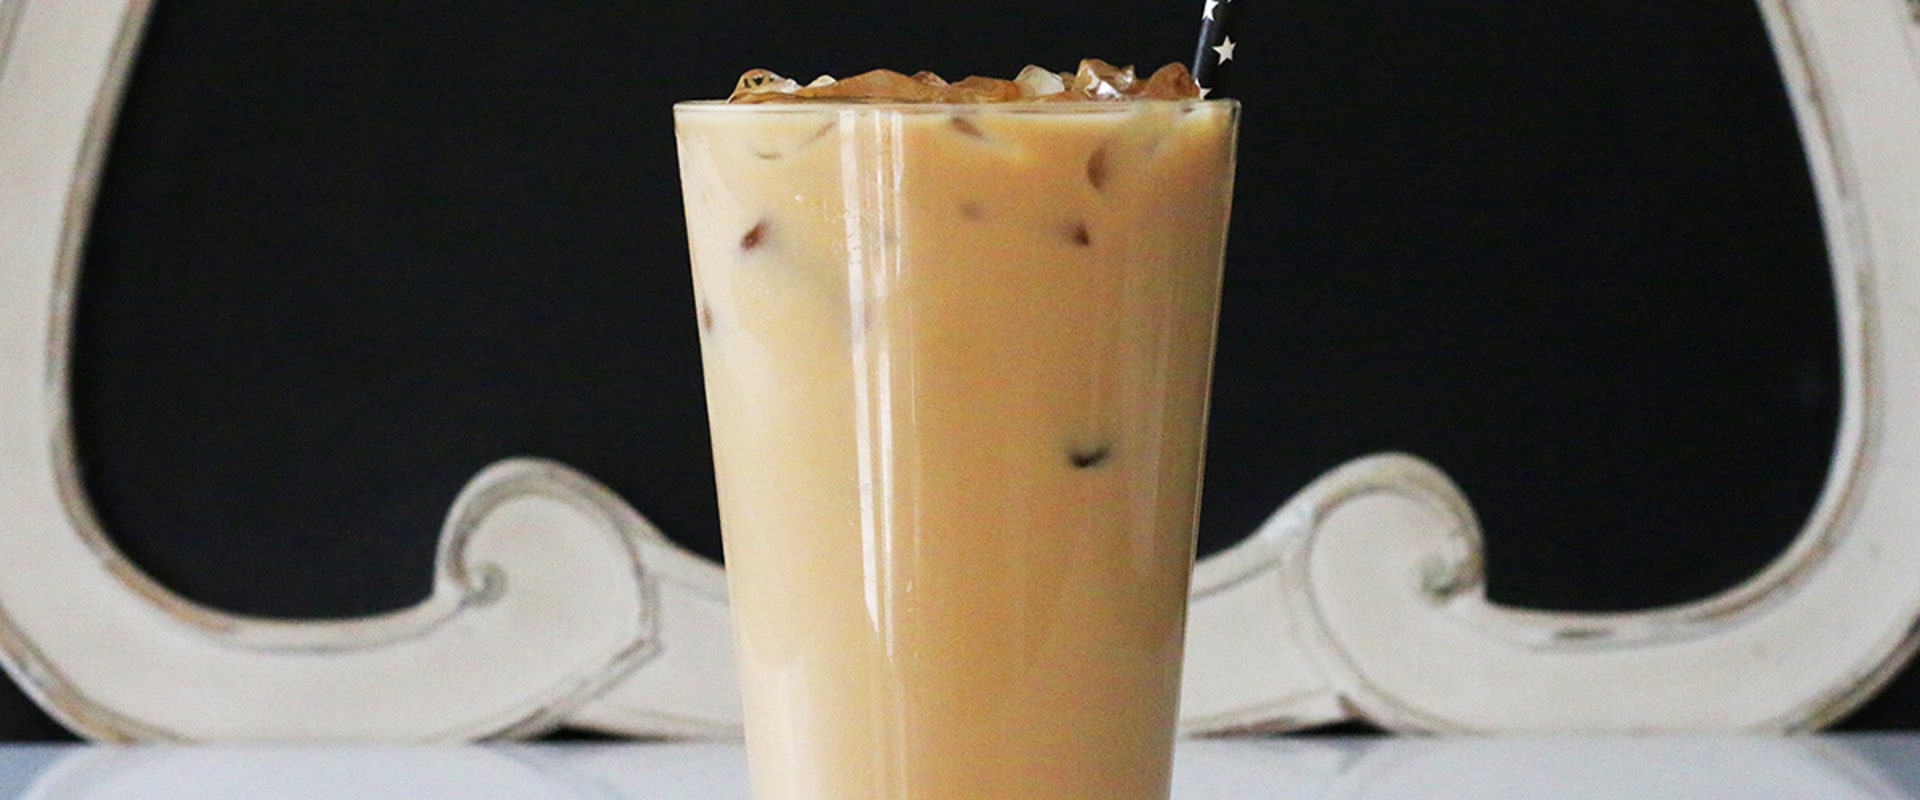 Is McDonald's French Vanilla Iced Coffee Worth Trying?